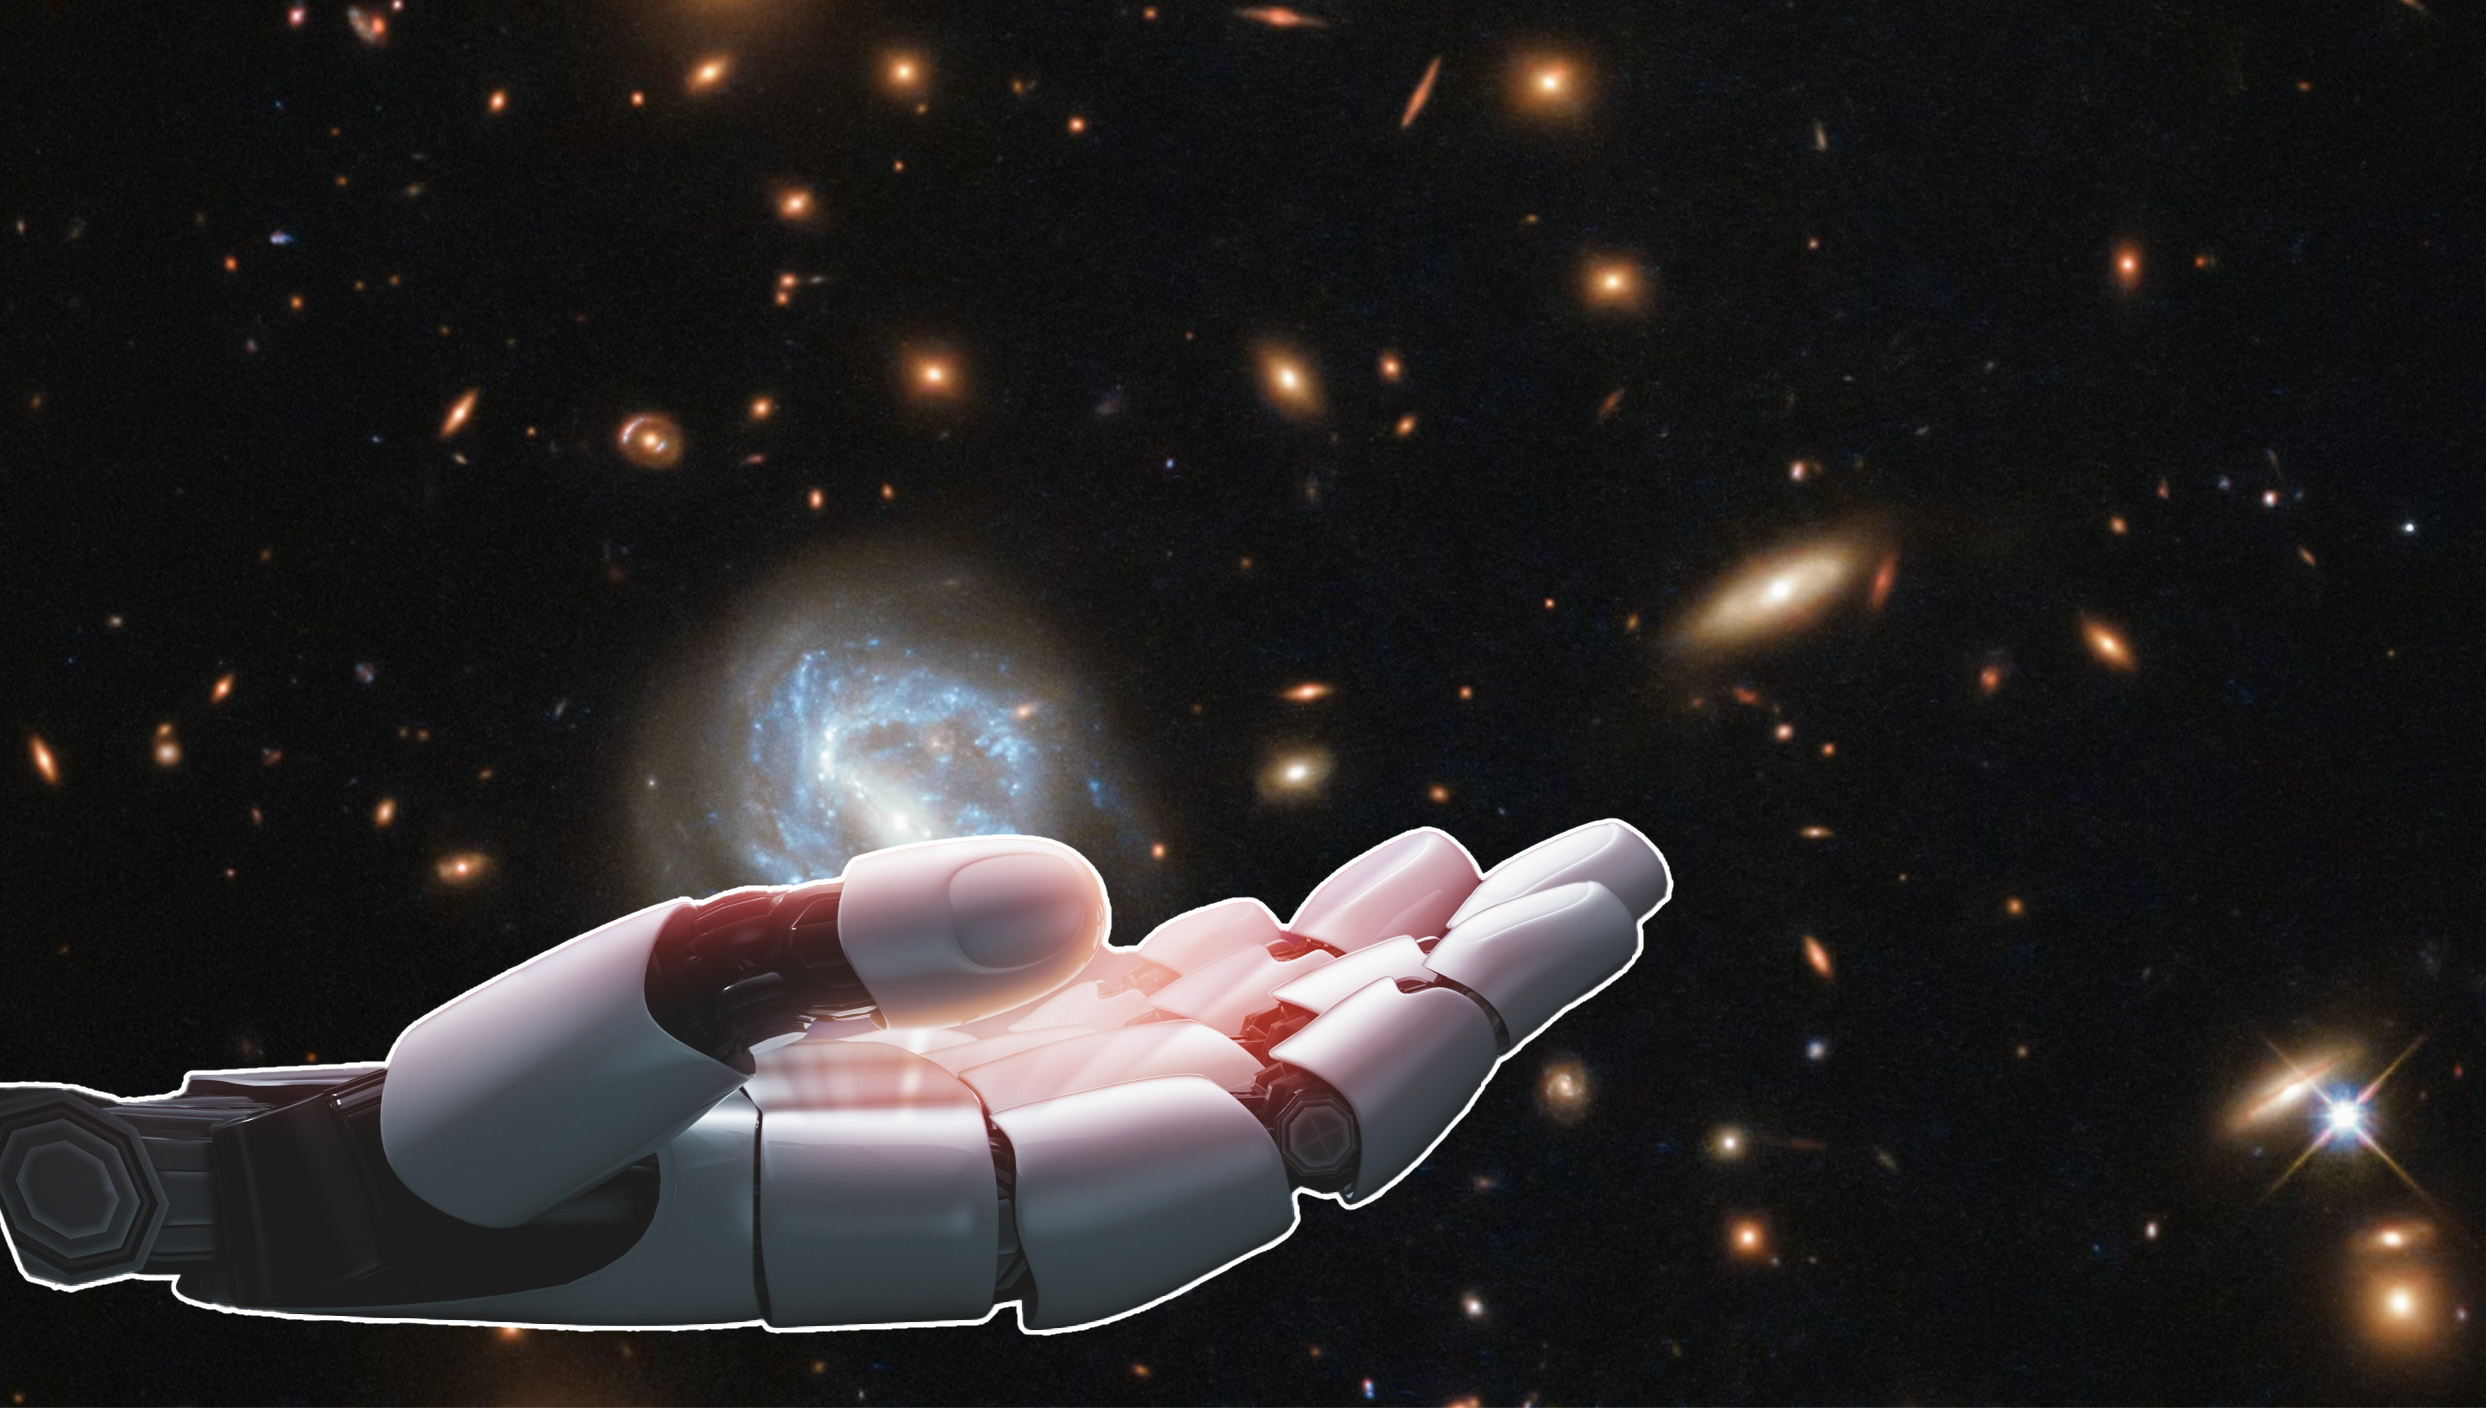 A NASA Hubble Space Telescope photo showing a spiral galaxy and other objects in space. In the foreground, an AI hand.